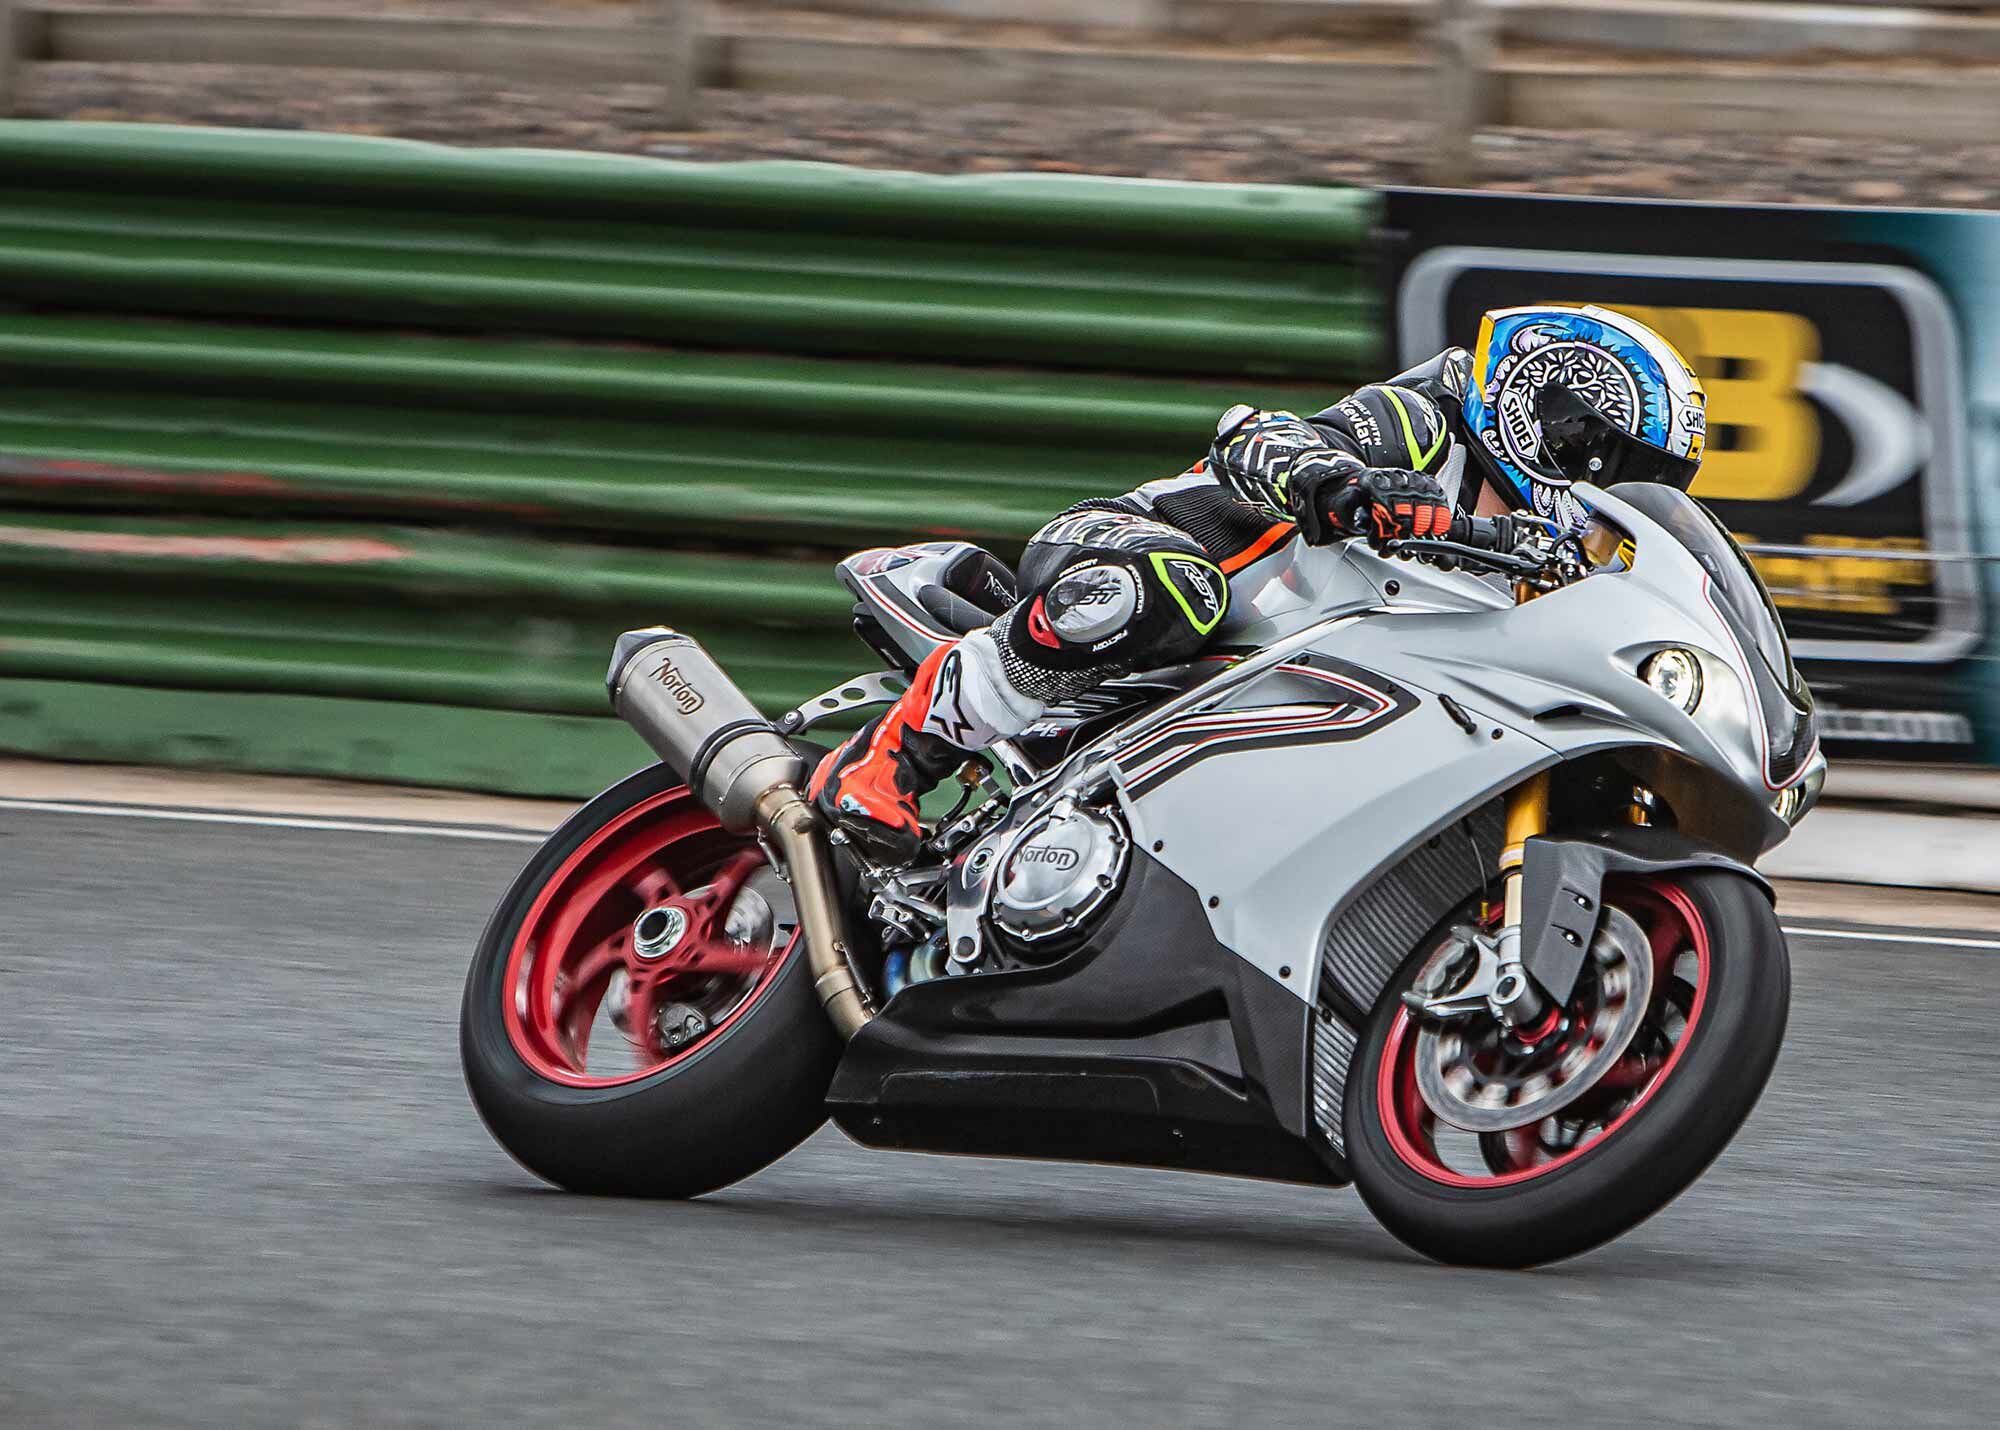 A claimed 185 hp is not impressive by modern superbike standards; even so, the V4VS is quick.